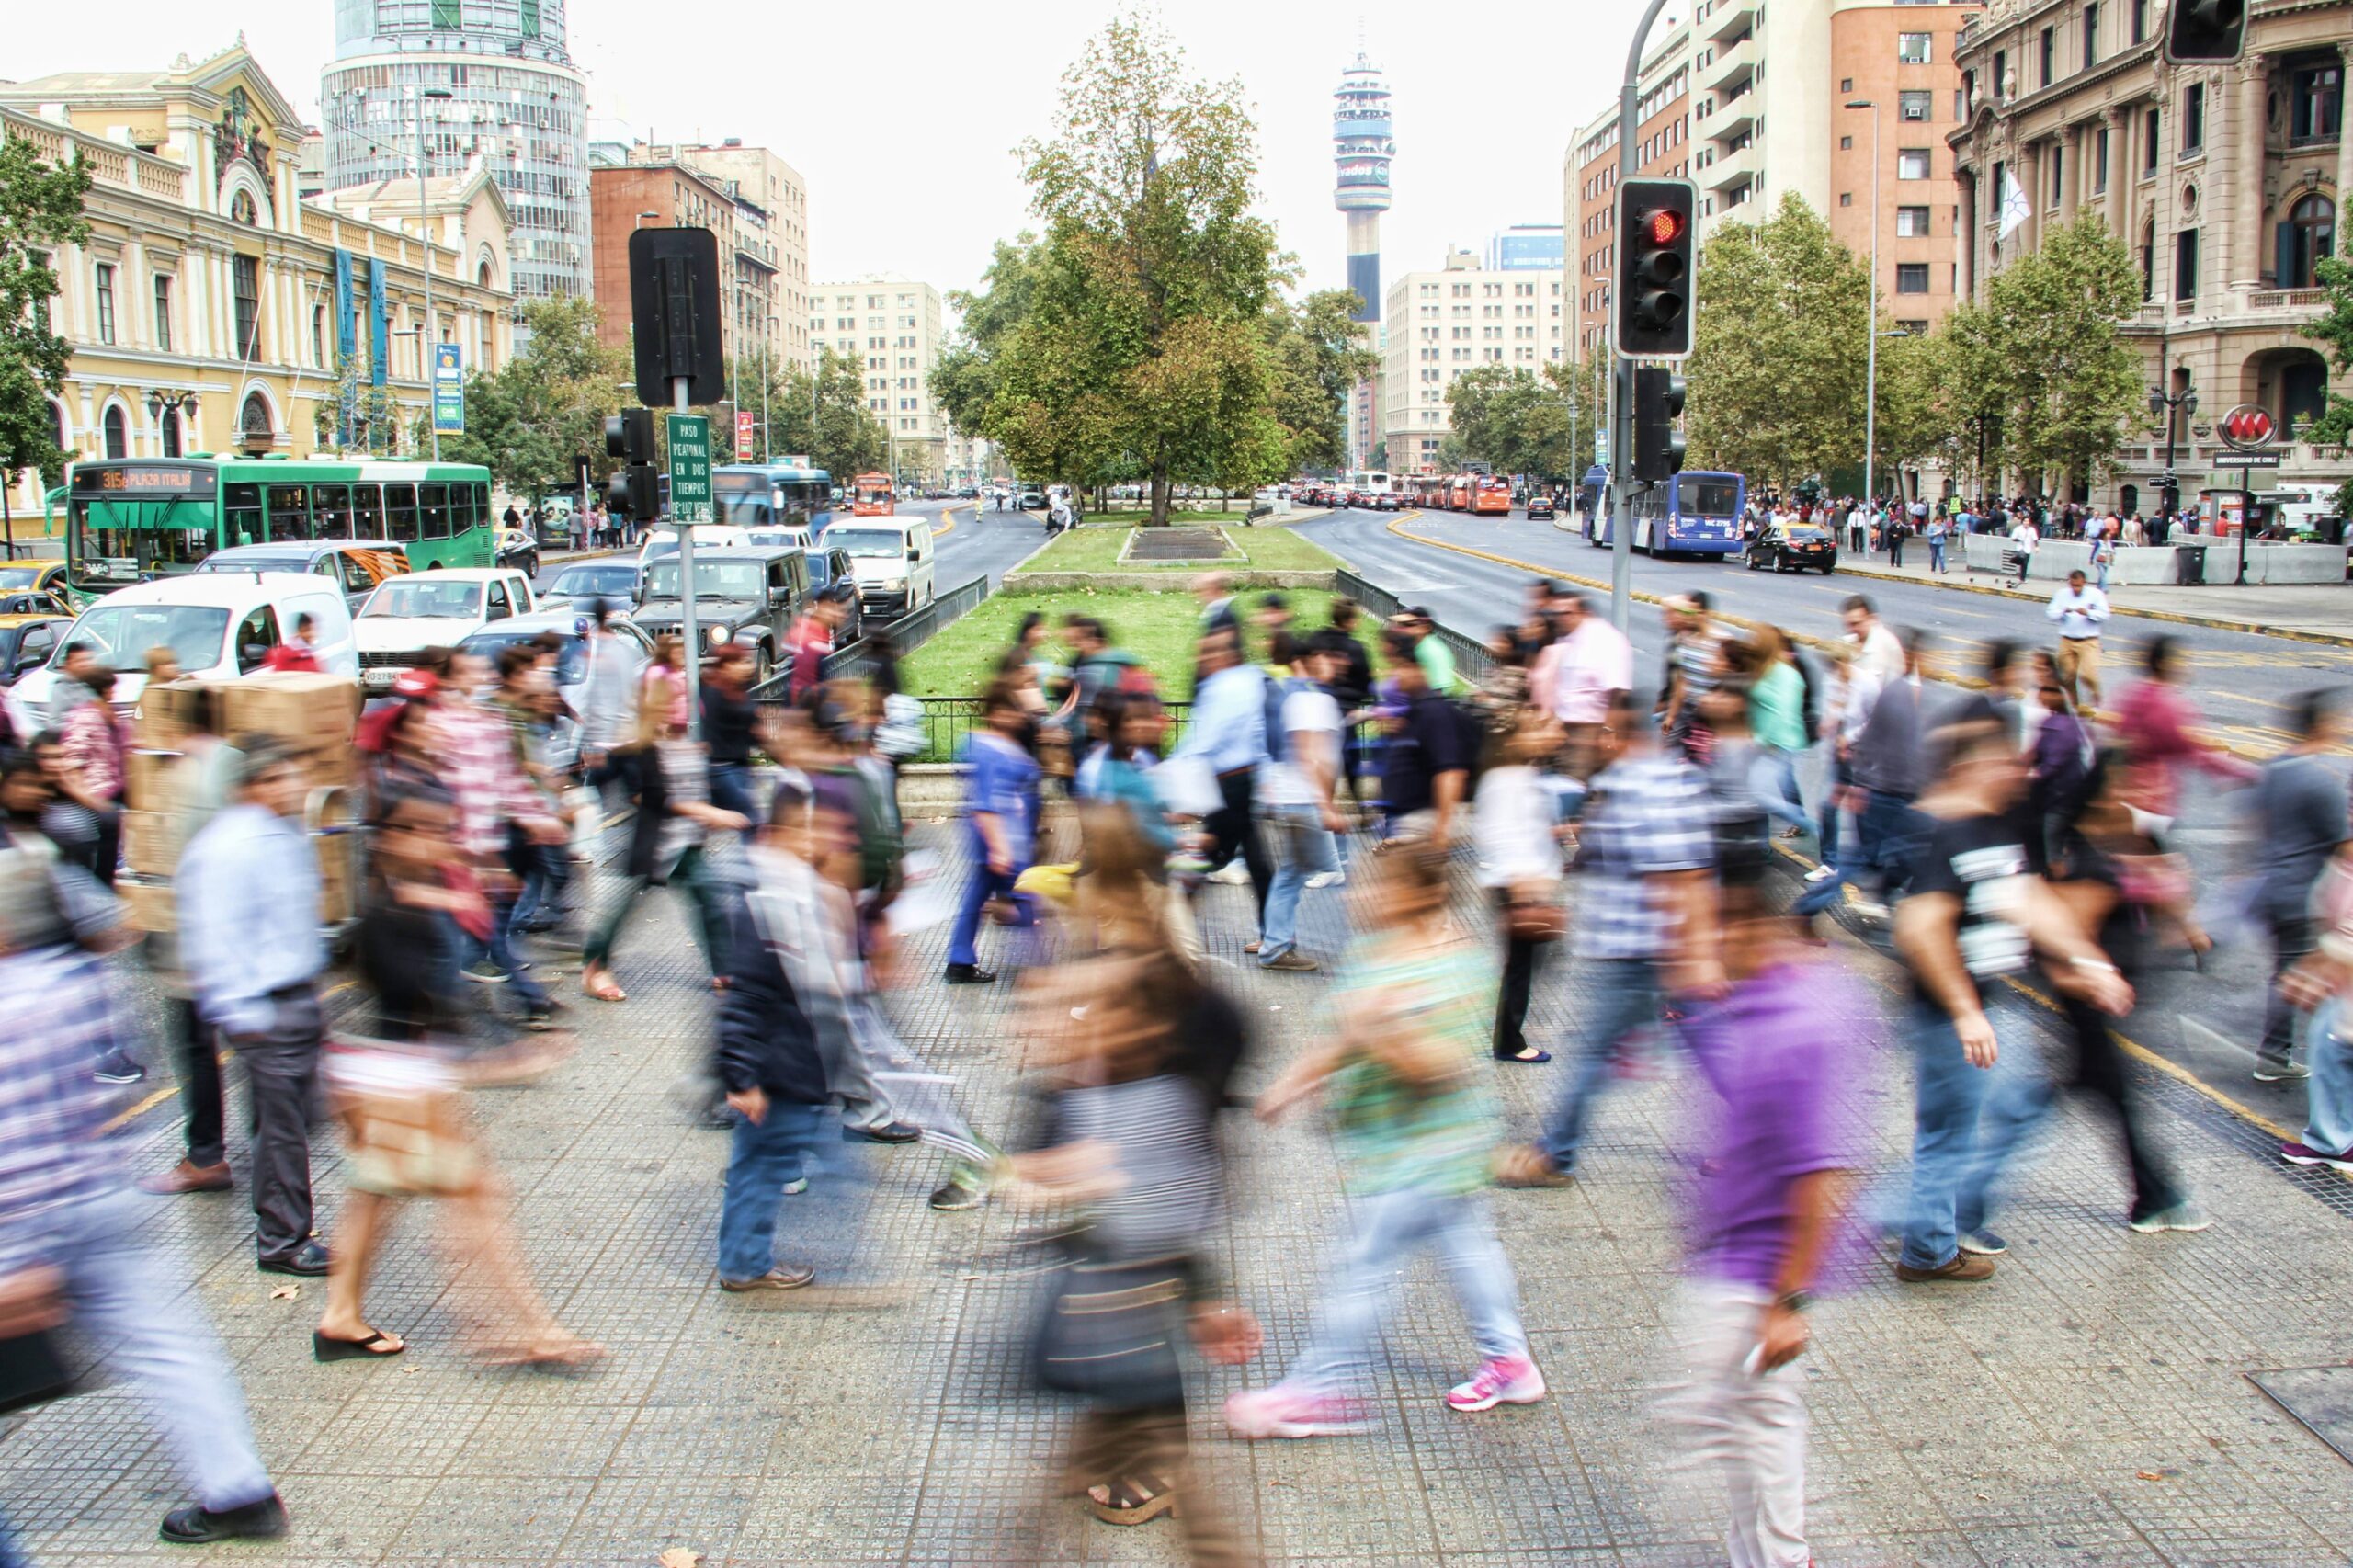 An image of a crowd of people walking across a streetscape. The people are blurred.